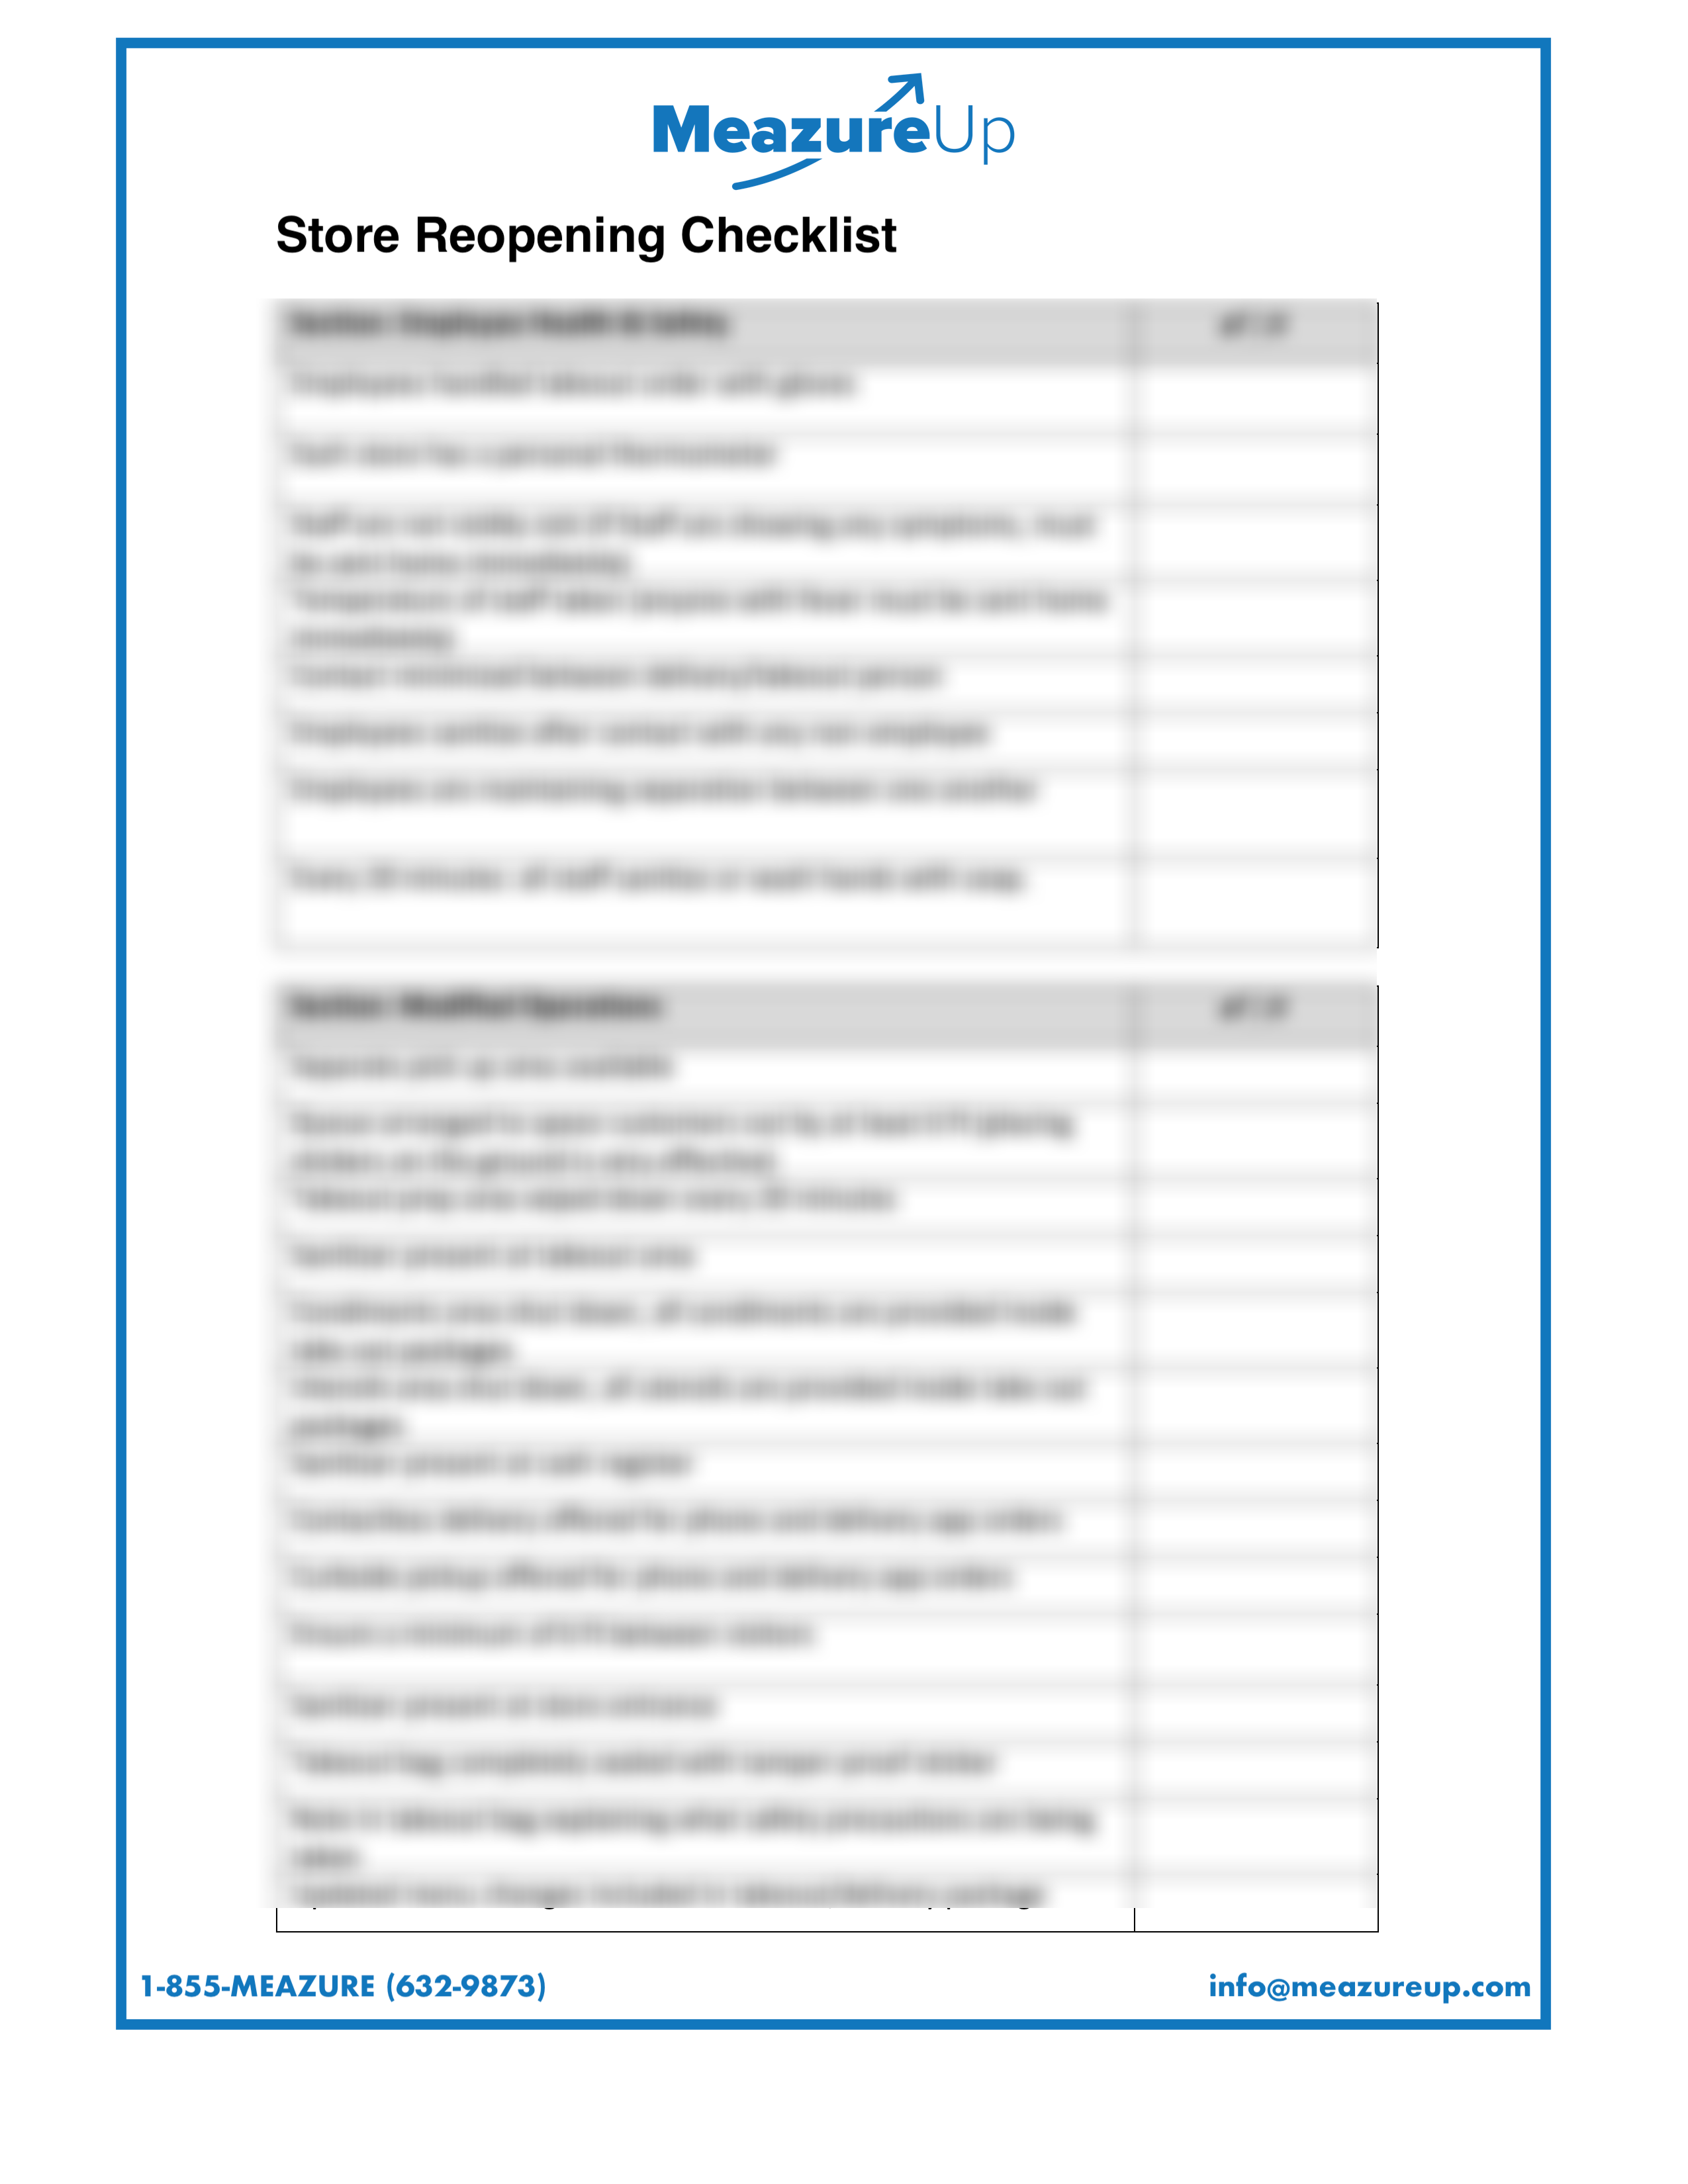 blurred store reopening checklist